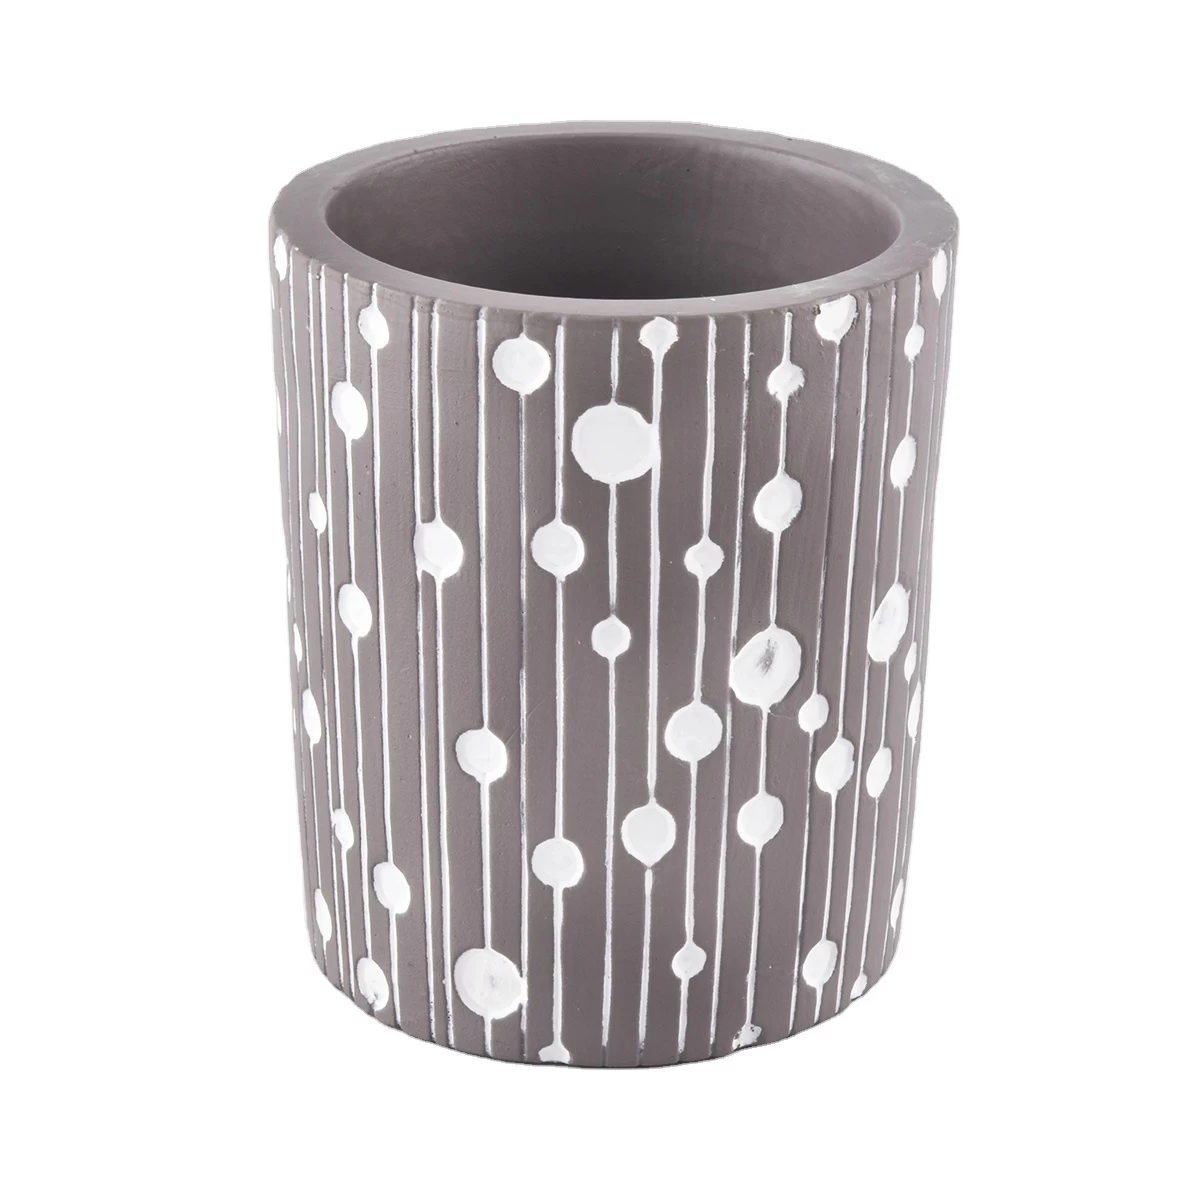 Sunny custom grey cylinder concrete candle jar for candle making home decoration